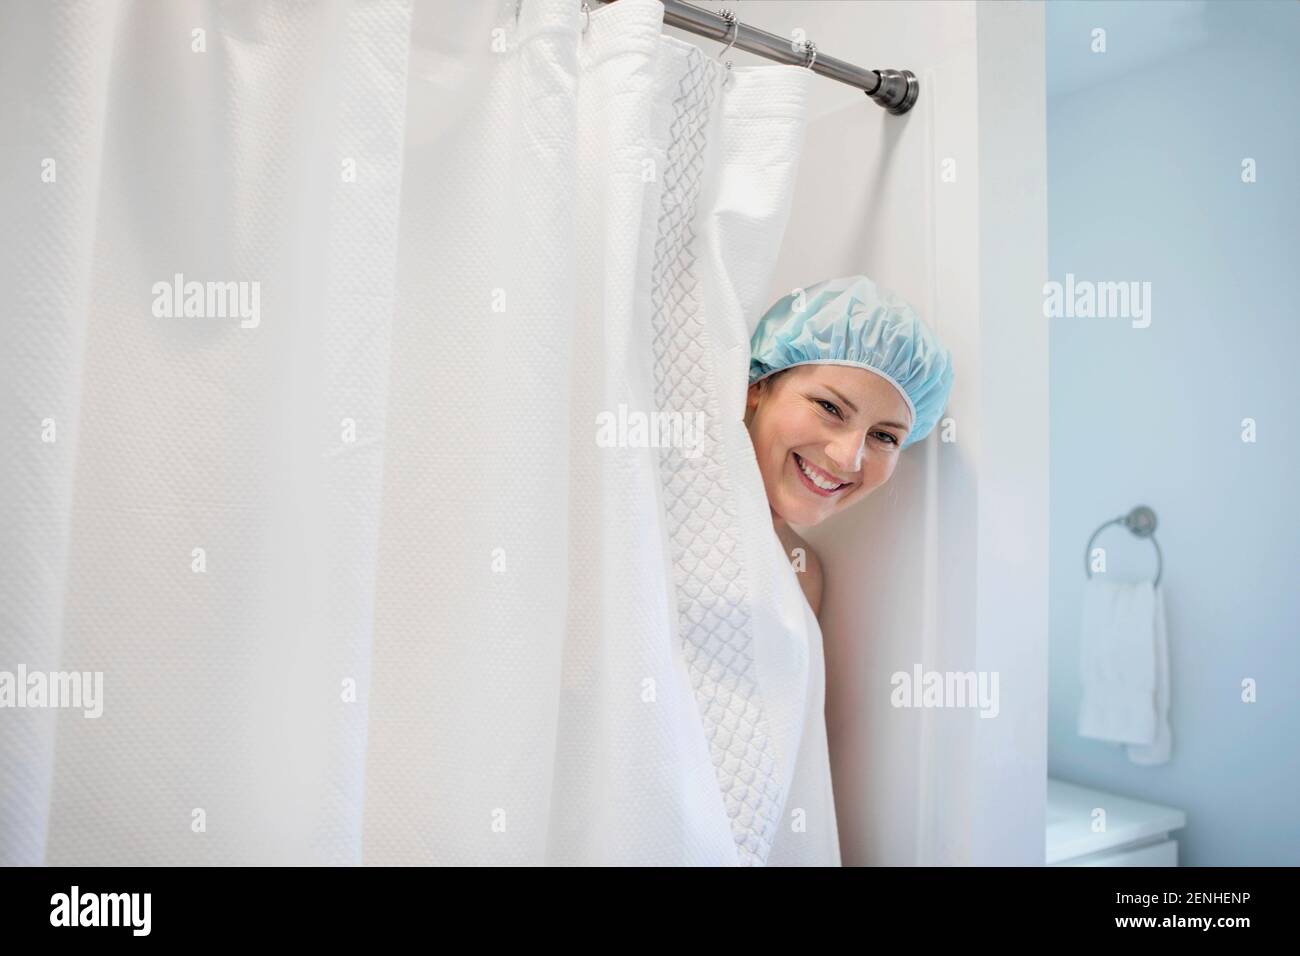 A woman smiles as she peeks out of a shower stall wearing a shower cap. Stock Photo